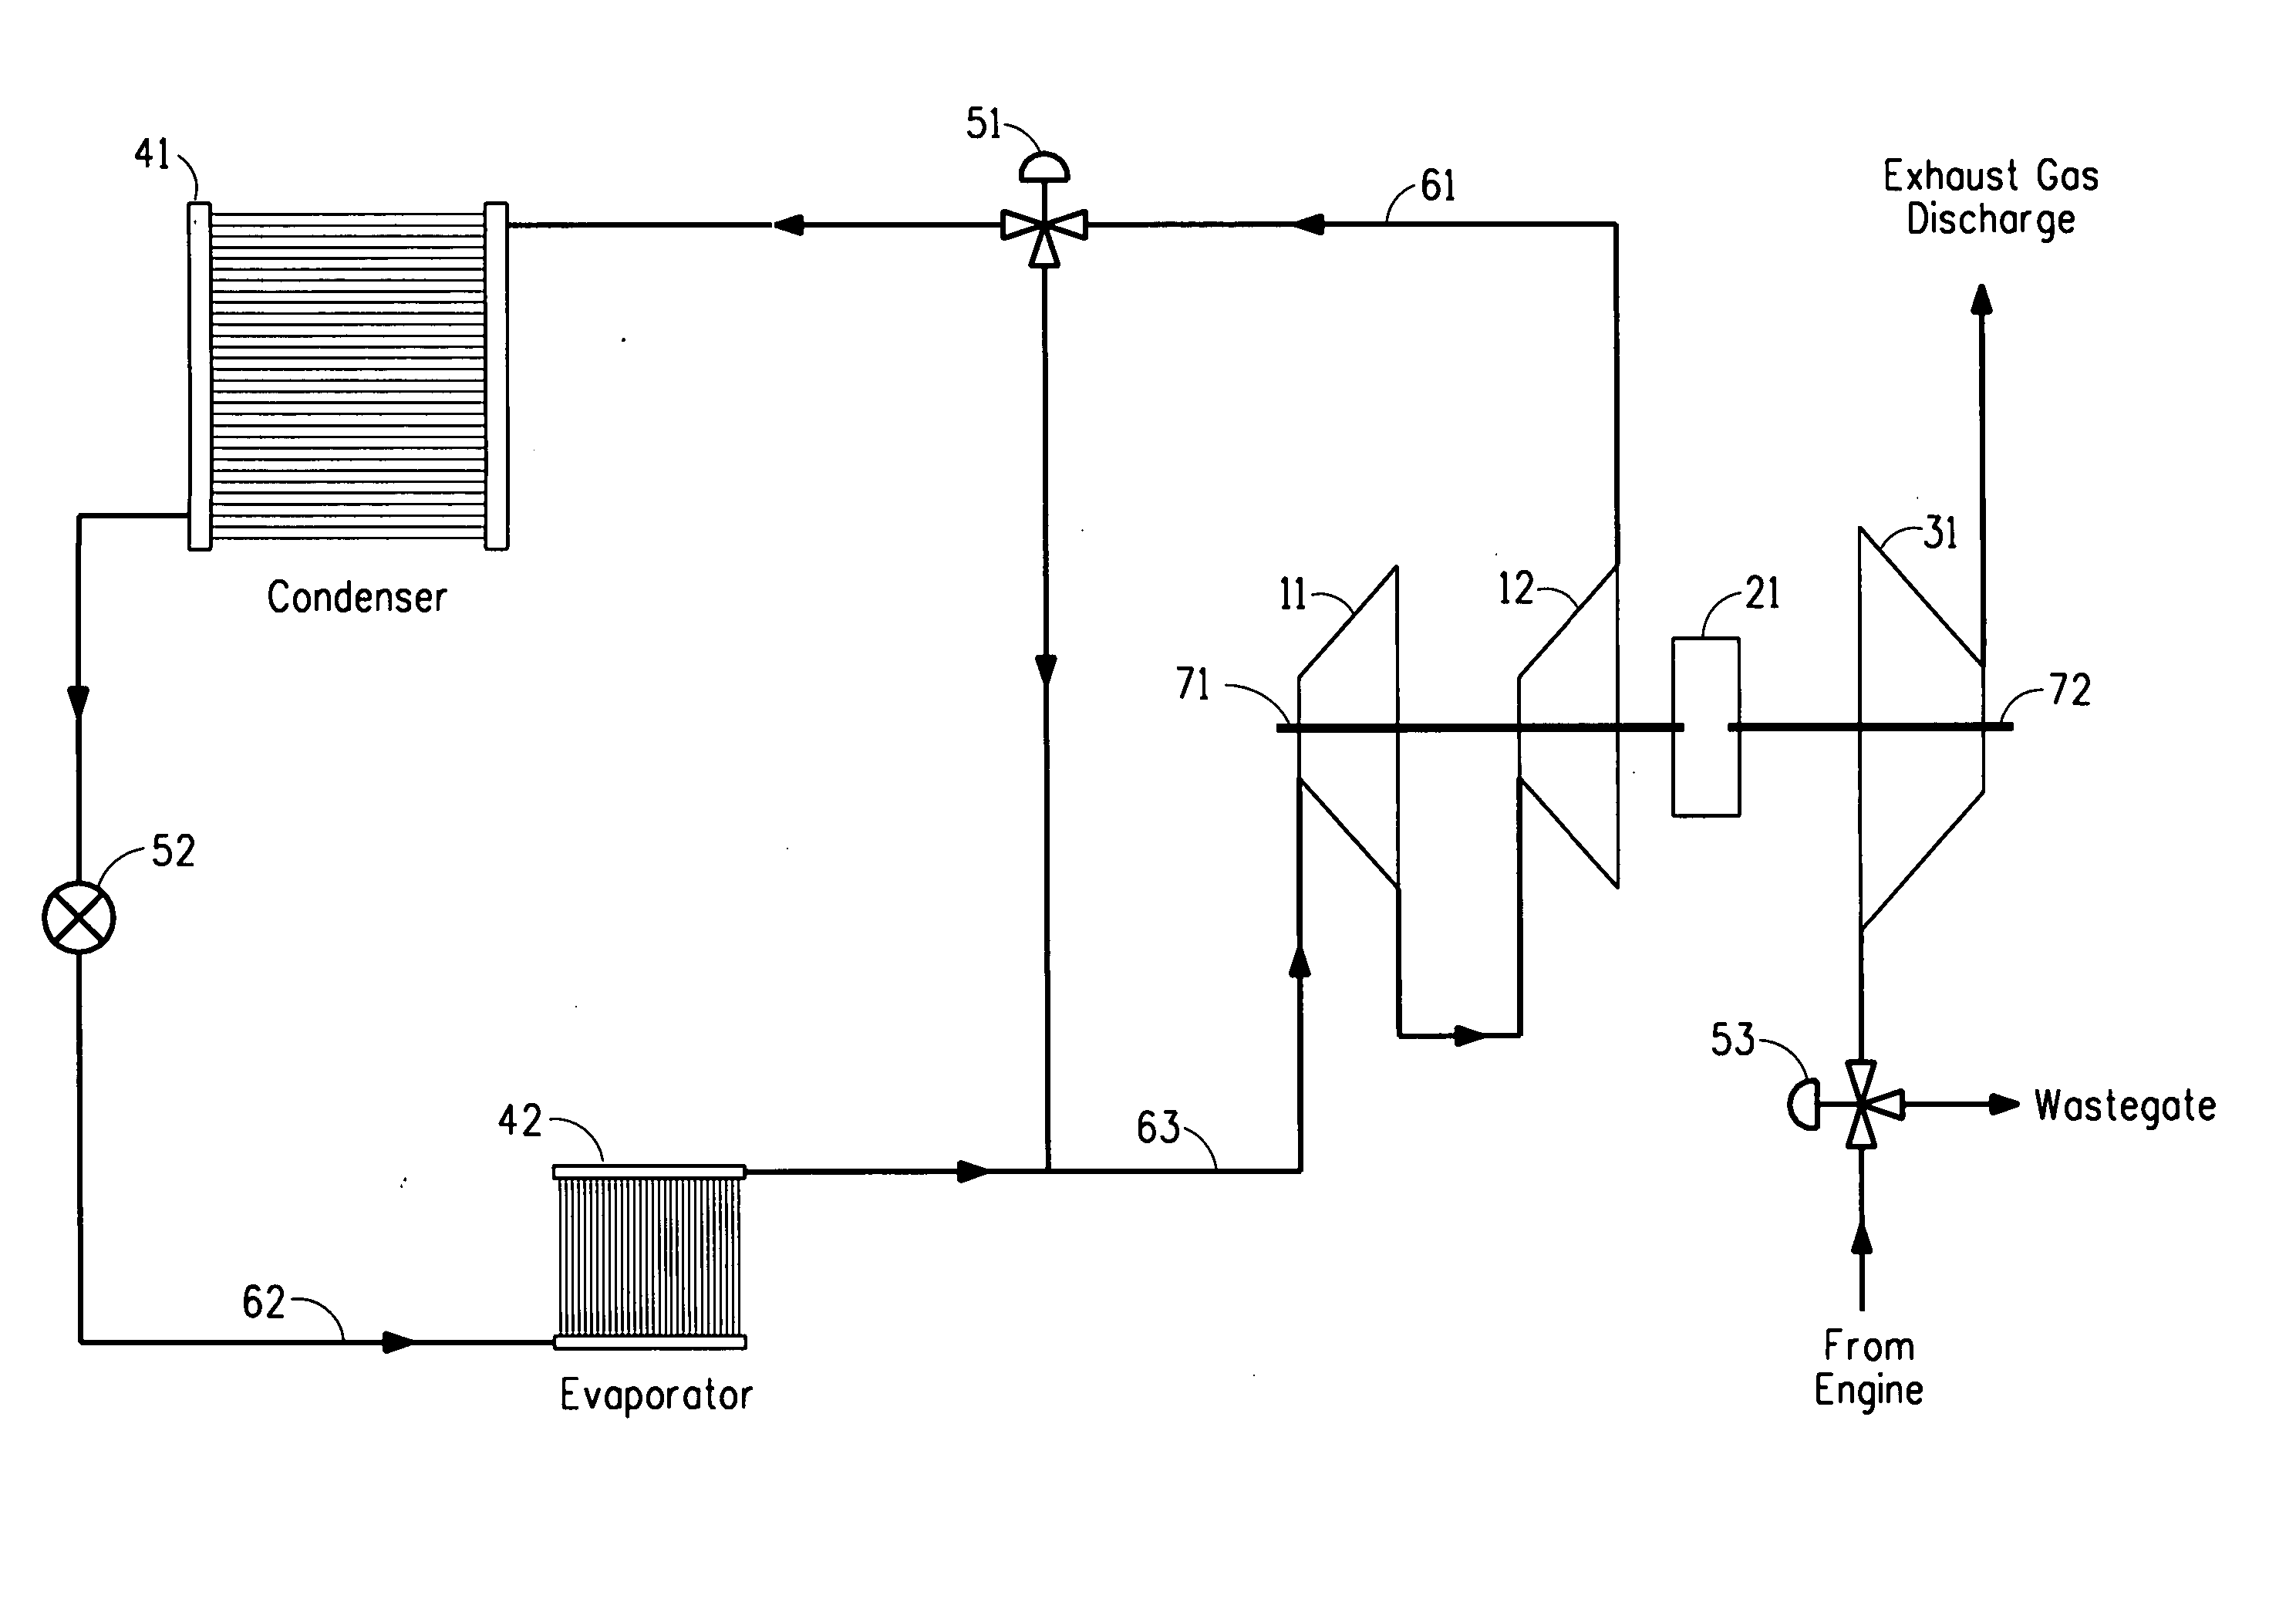 Refrigeration/air-conditioning apparatus powered by an engine exhaust gas driven turbine